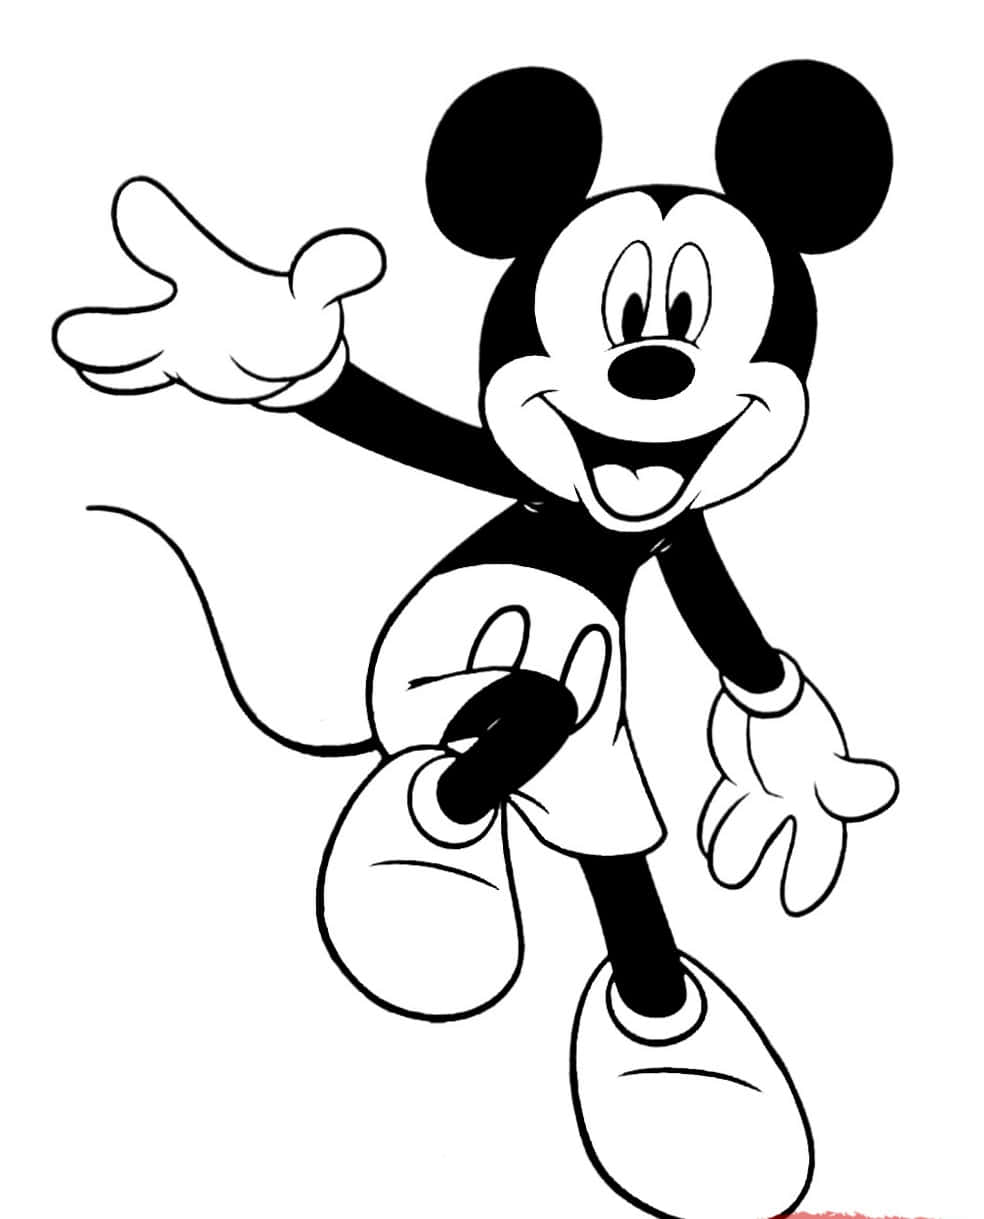 Inspire creativity with this adorable Mickey Mouse colouring picture!